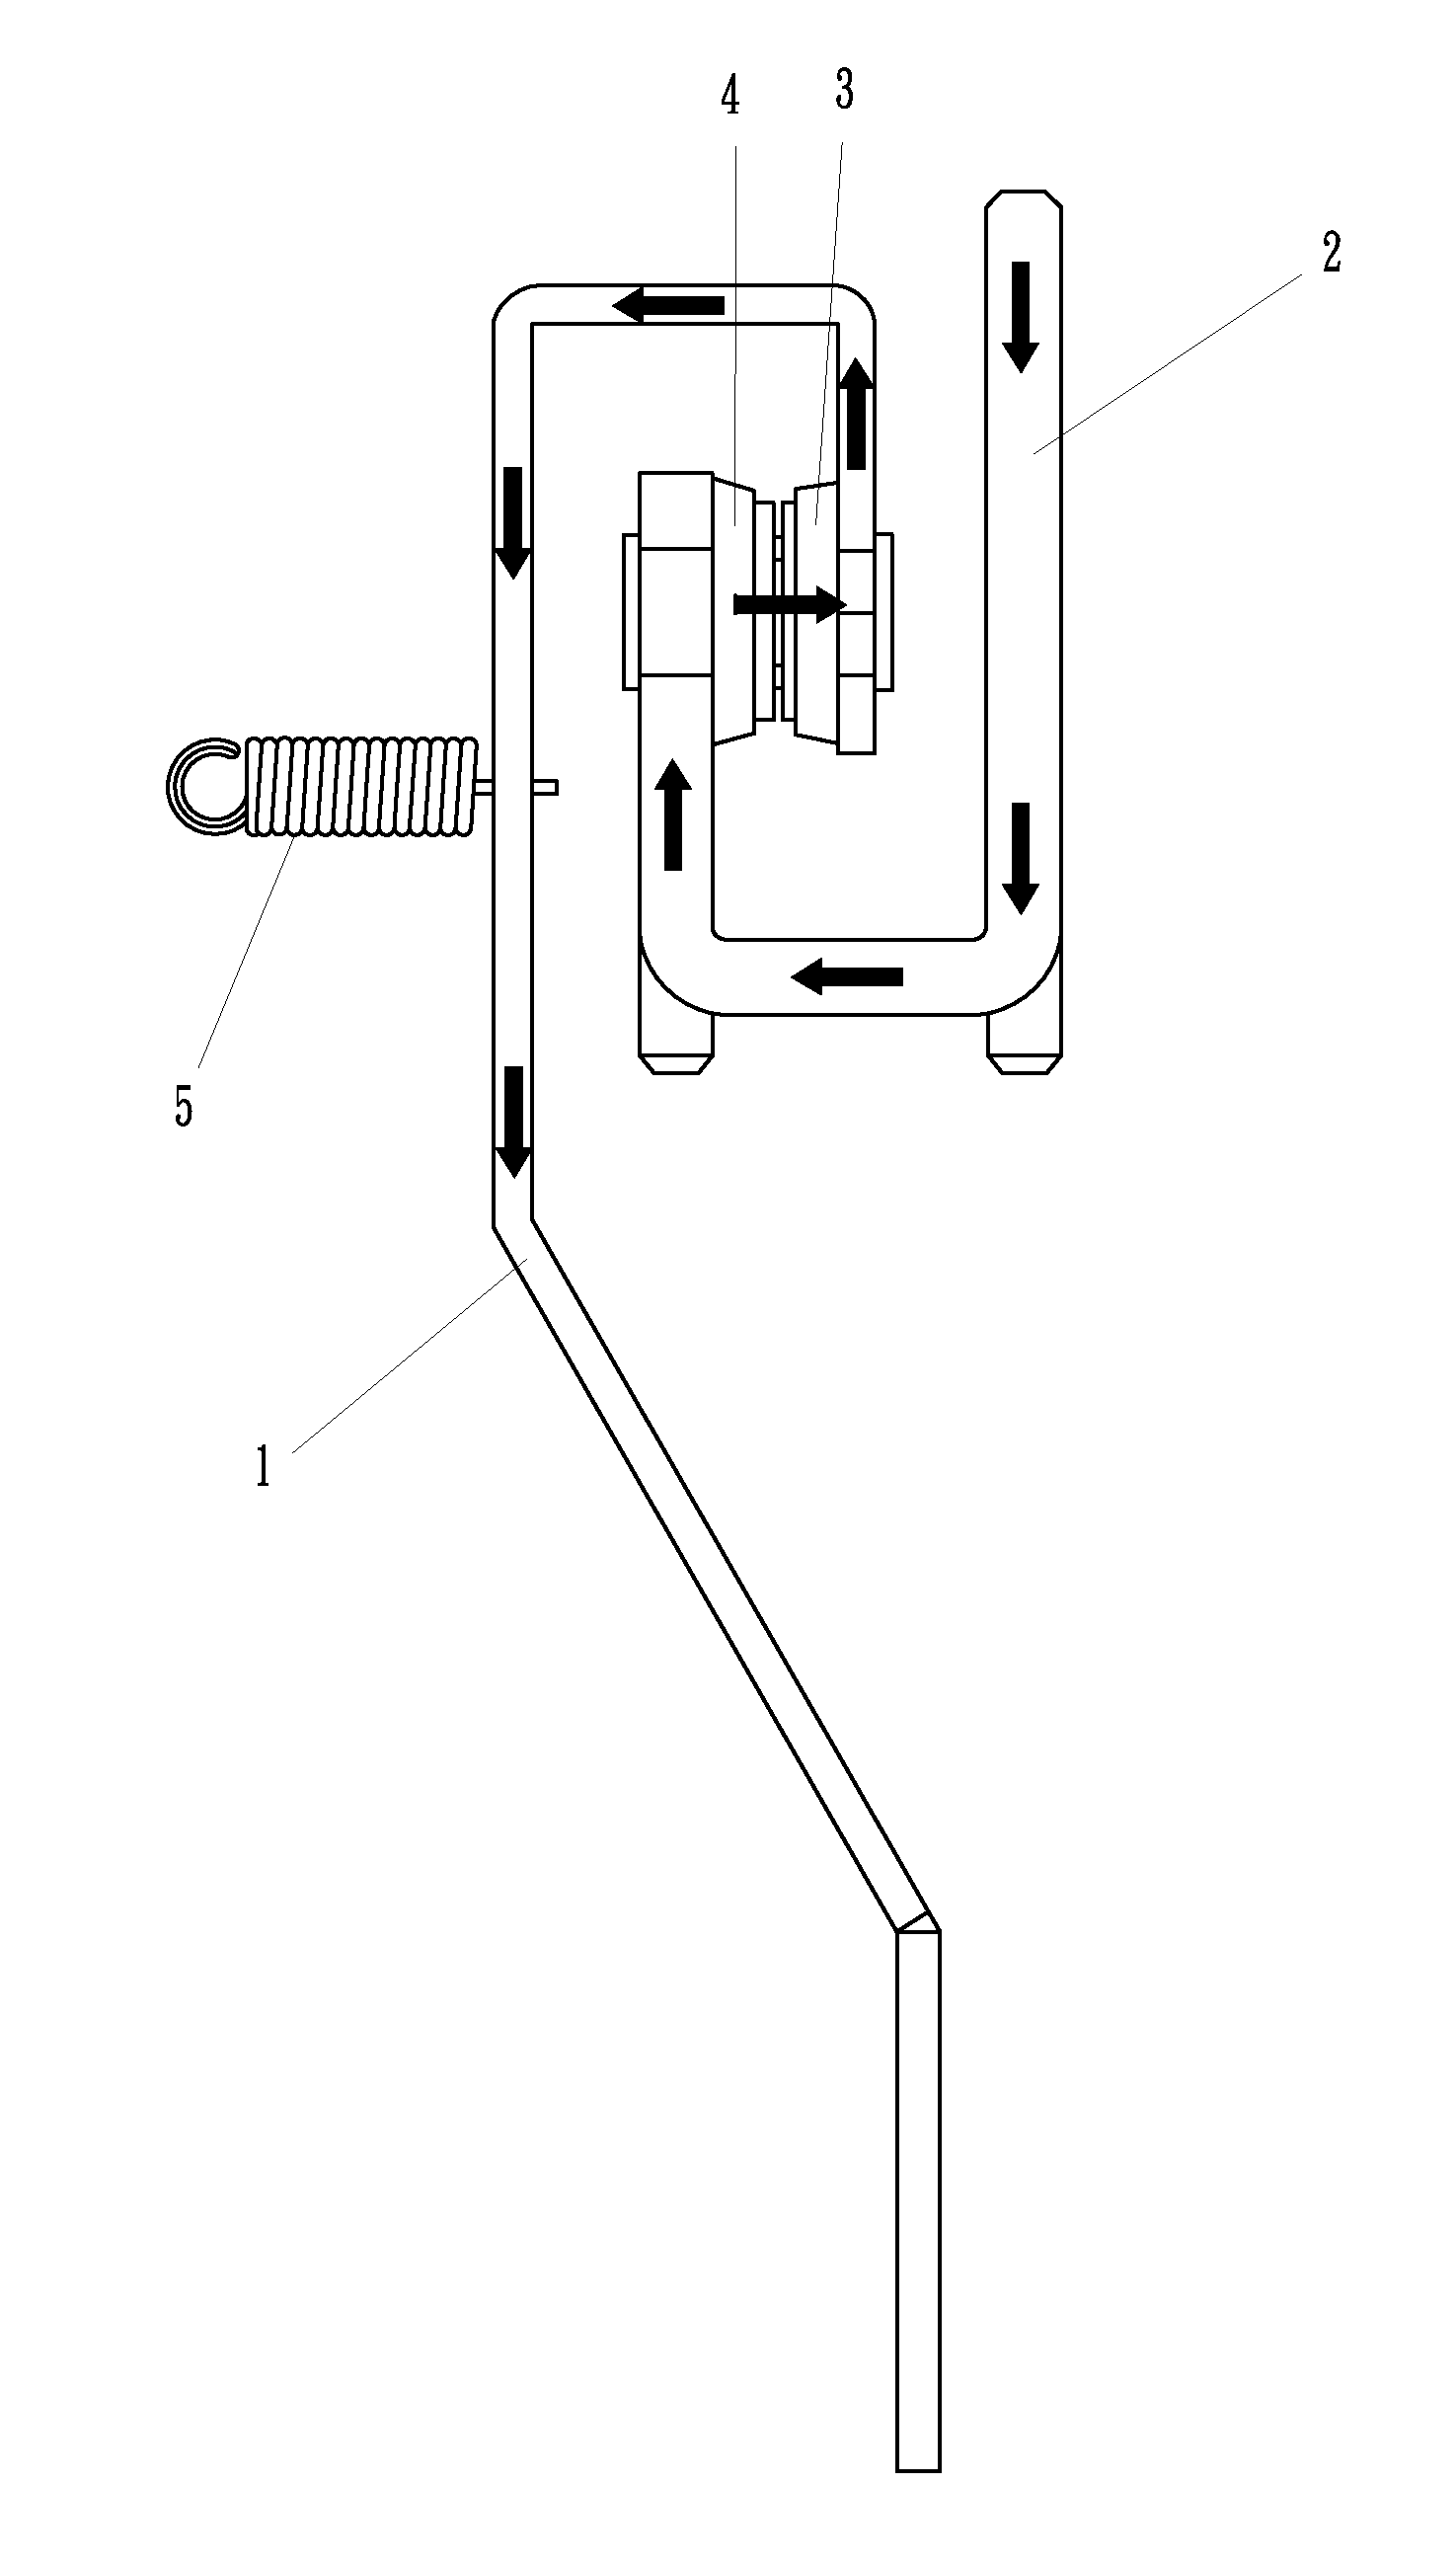 Reed switch assembly of magnetic latching relay